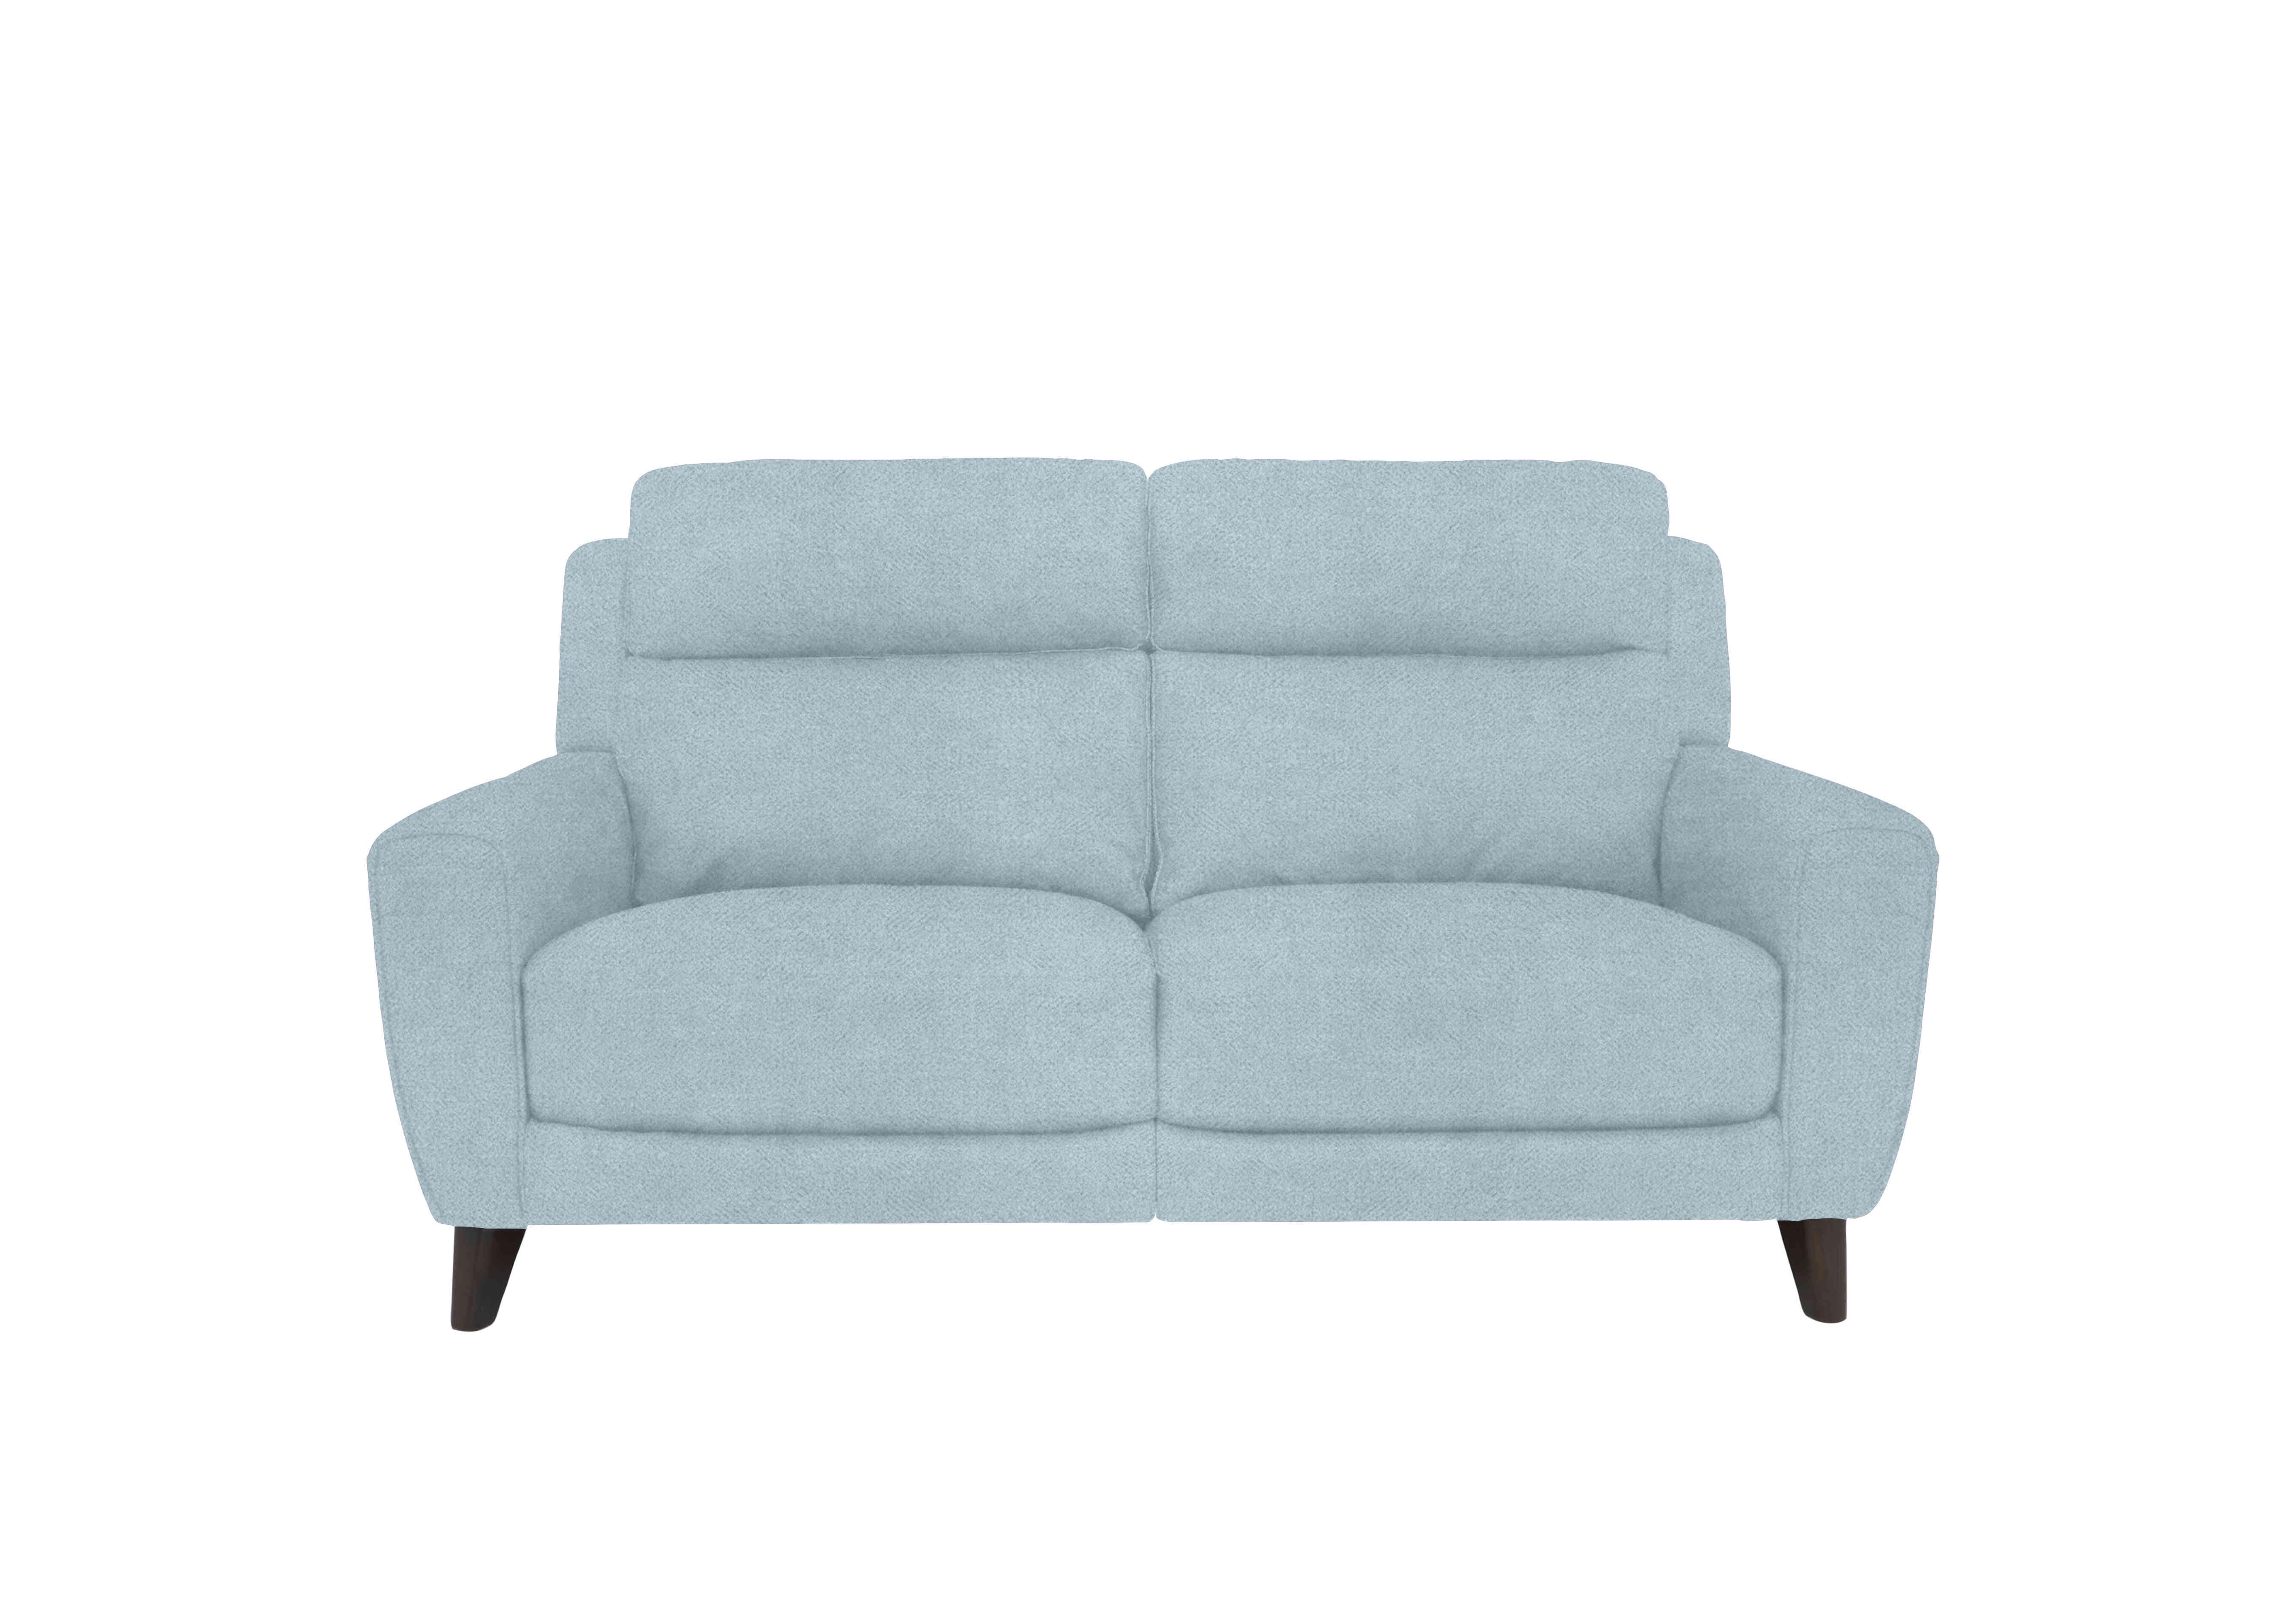 Zen 2 Seater Fabric Sofa in Fab-Meo-R17 Baby Blue on Furniture Village